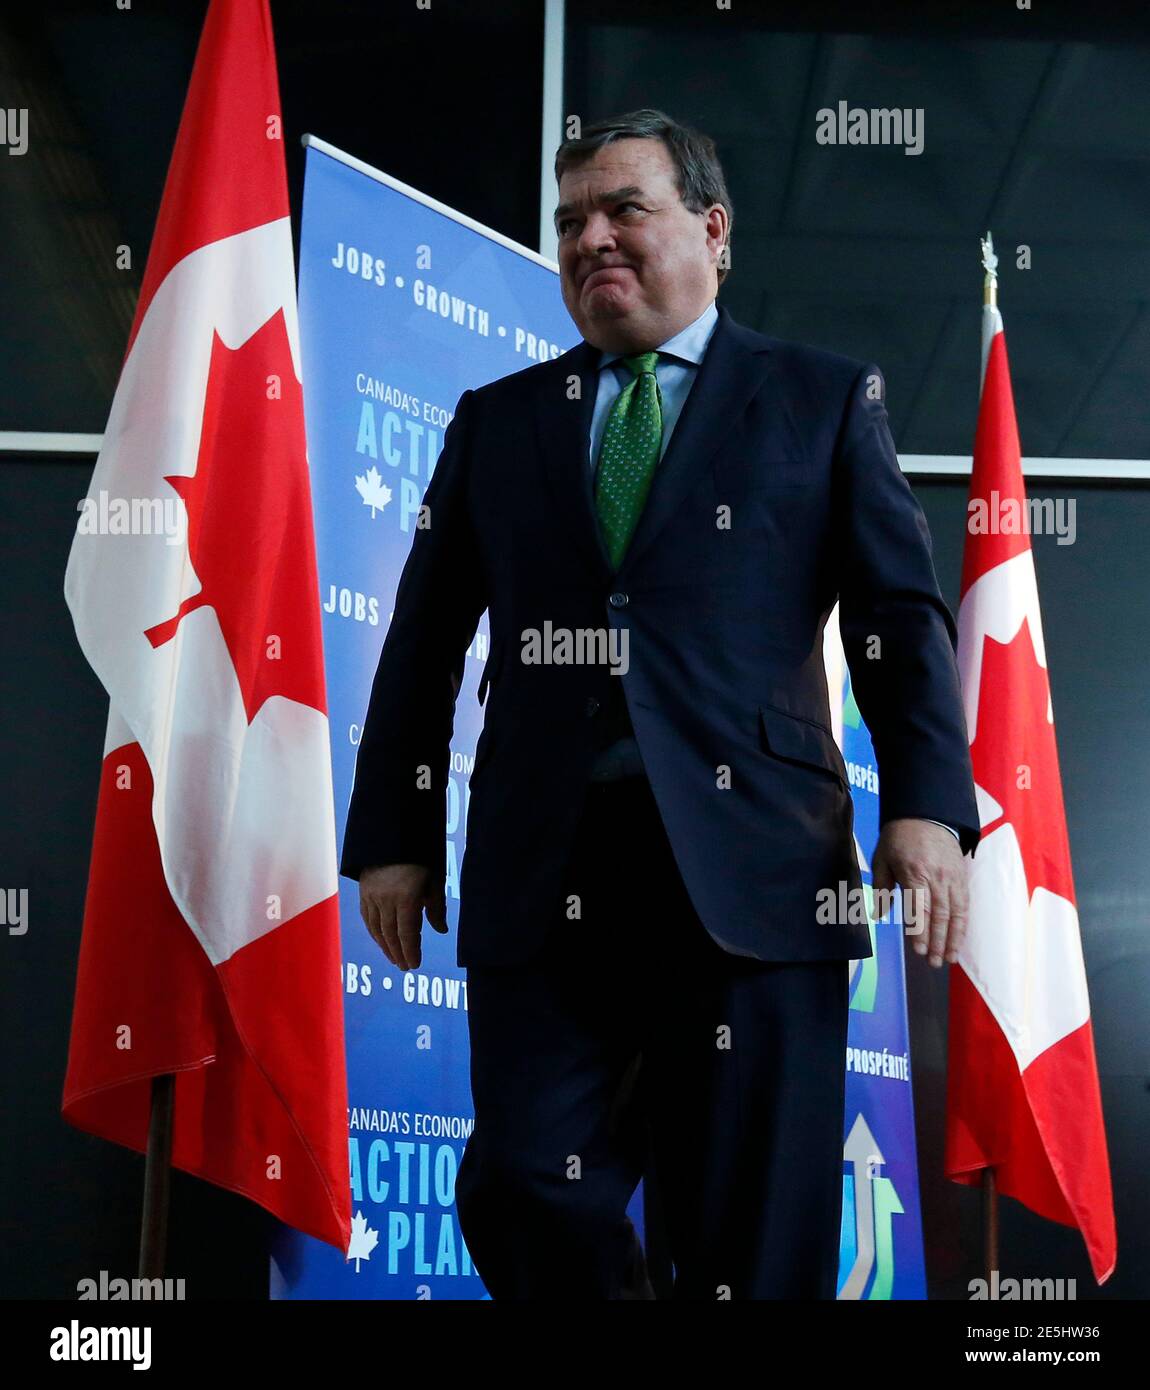 Canada's Finance Minister Jim Flaherty leaves following a news conference in Ottawa March 1, 2013. The slowing Canadian economy means the government will have lower revenues than it initially forecast as it draws up the next budget, which is due soon, Flaherty said on Friday. REUTERS/Chris Wattie (CANADA - Tags: POLITICS BUSINESS) Stock Photo